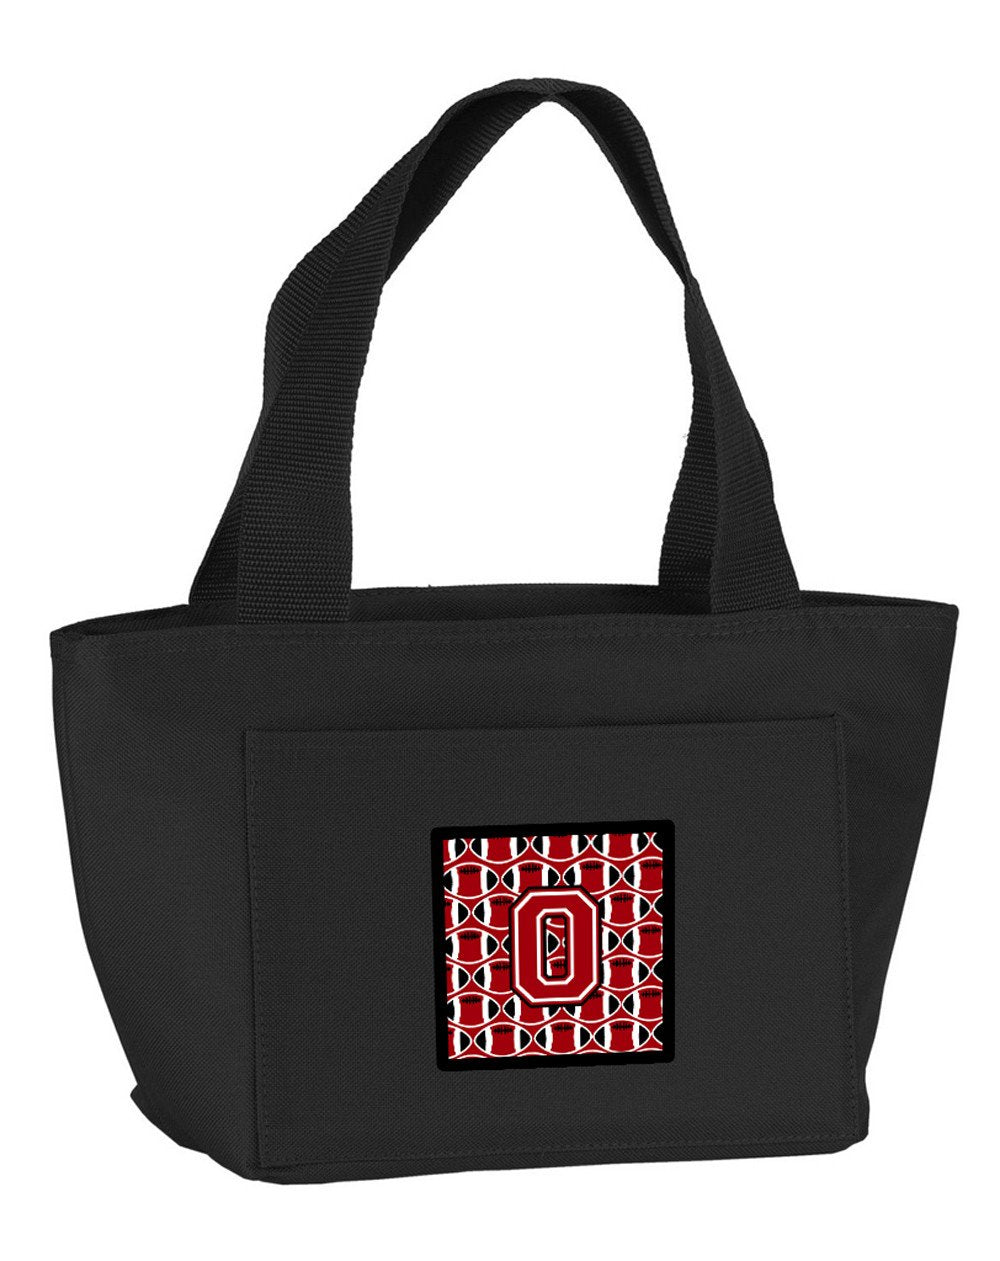 Letter O Football Red, Black and White Lunch Bag CJ1073-OBK-8808 by Caroline's Treasures